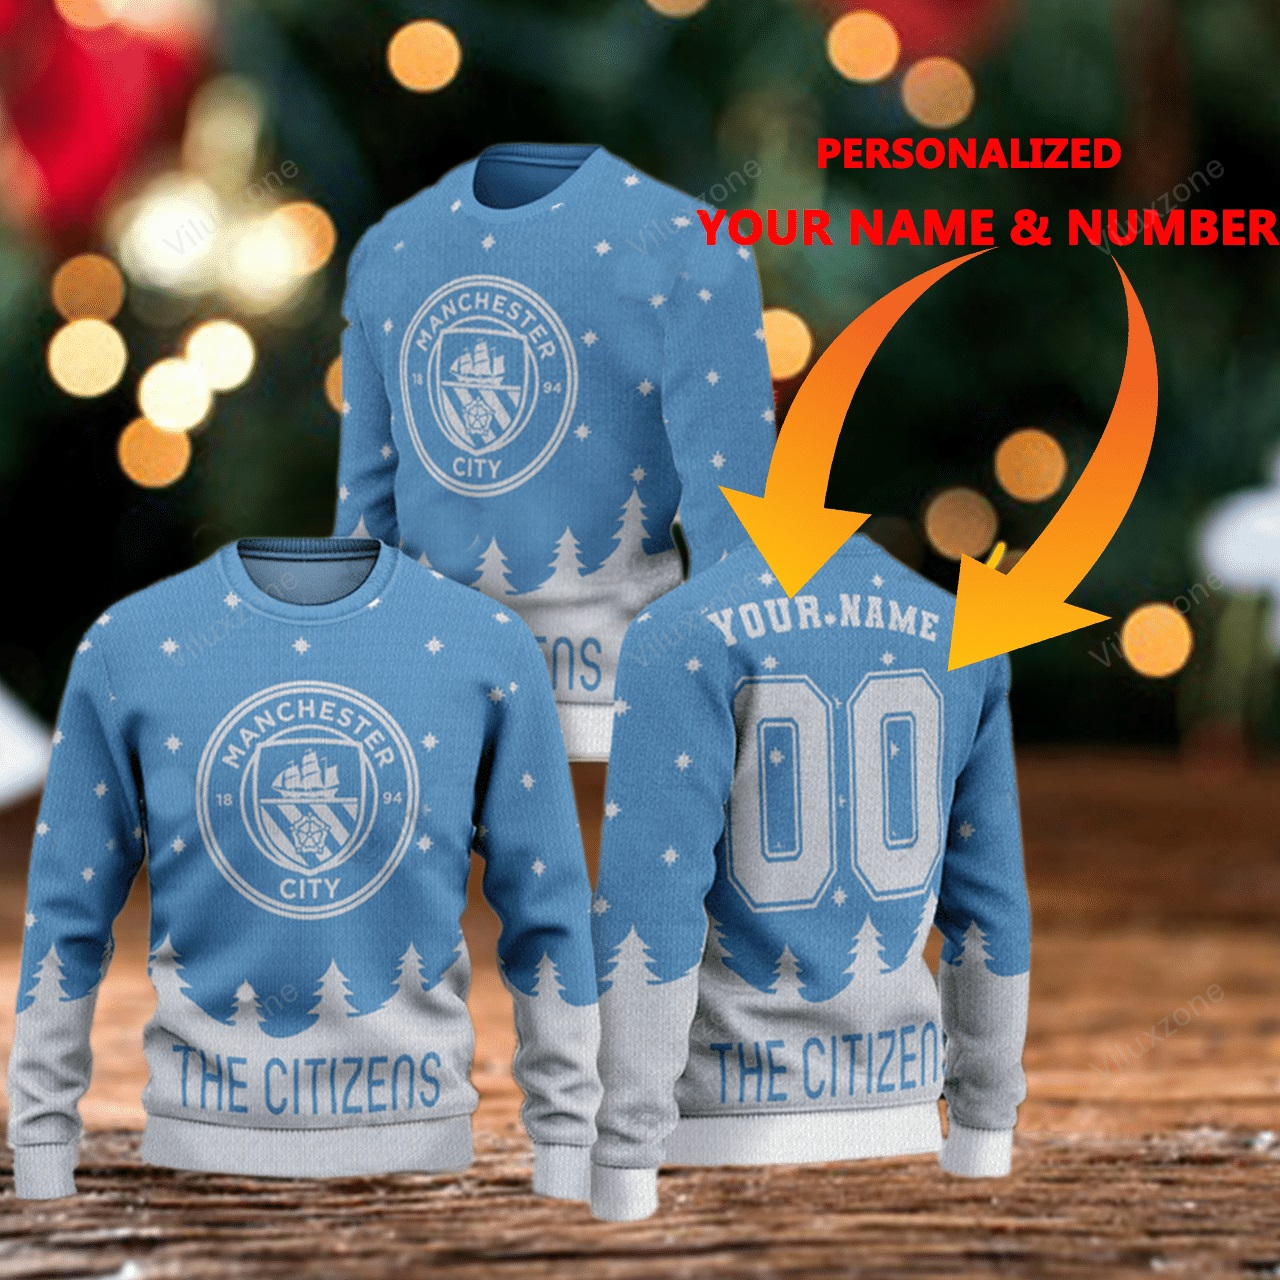 Manchester City FC The Citizens personalized name and number 3d xmas sweater